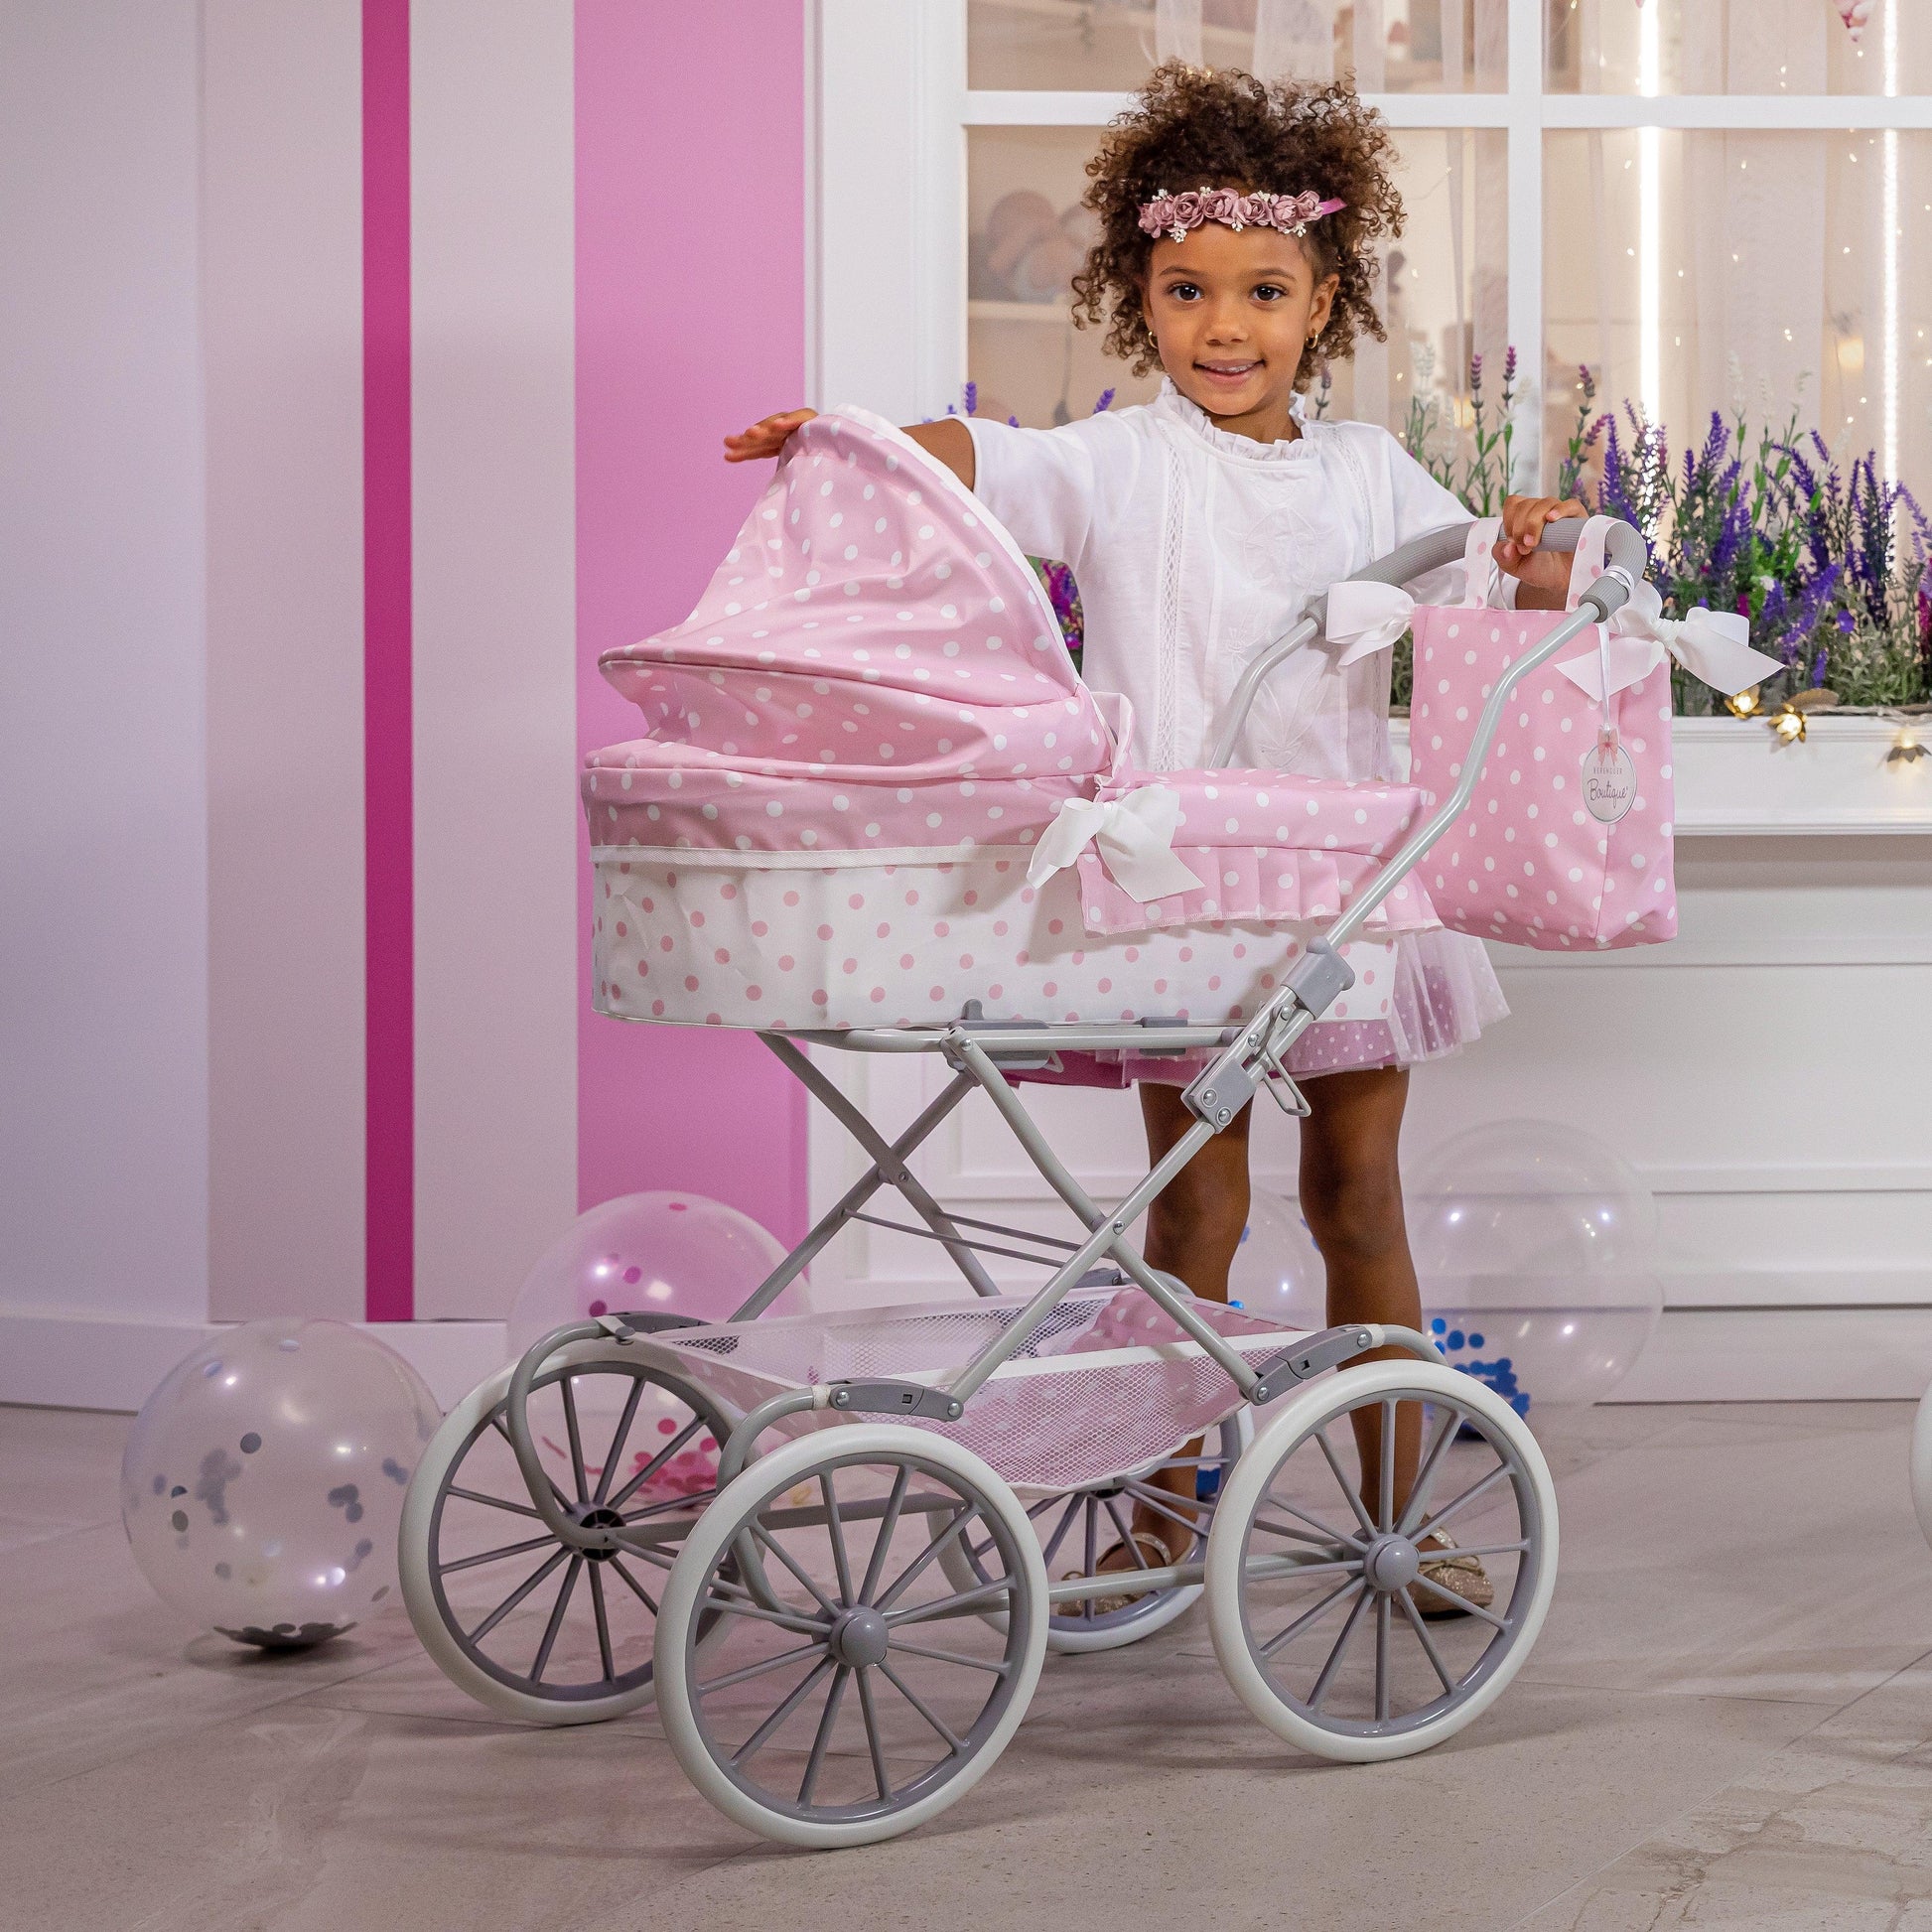 JC Toys Berenguer Boutique Royal Baby Doll Pram in Pink for Ages 3+ - JC Toys Group Inc.